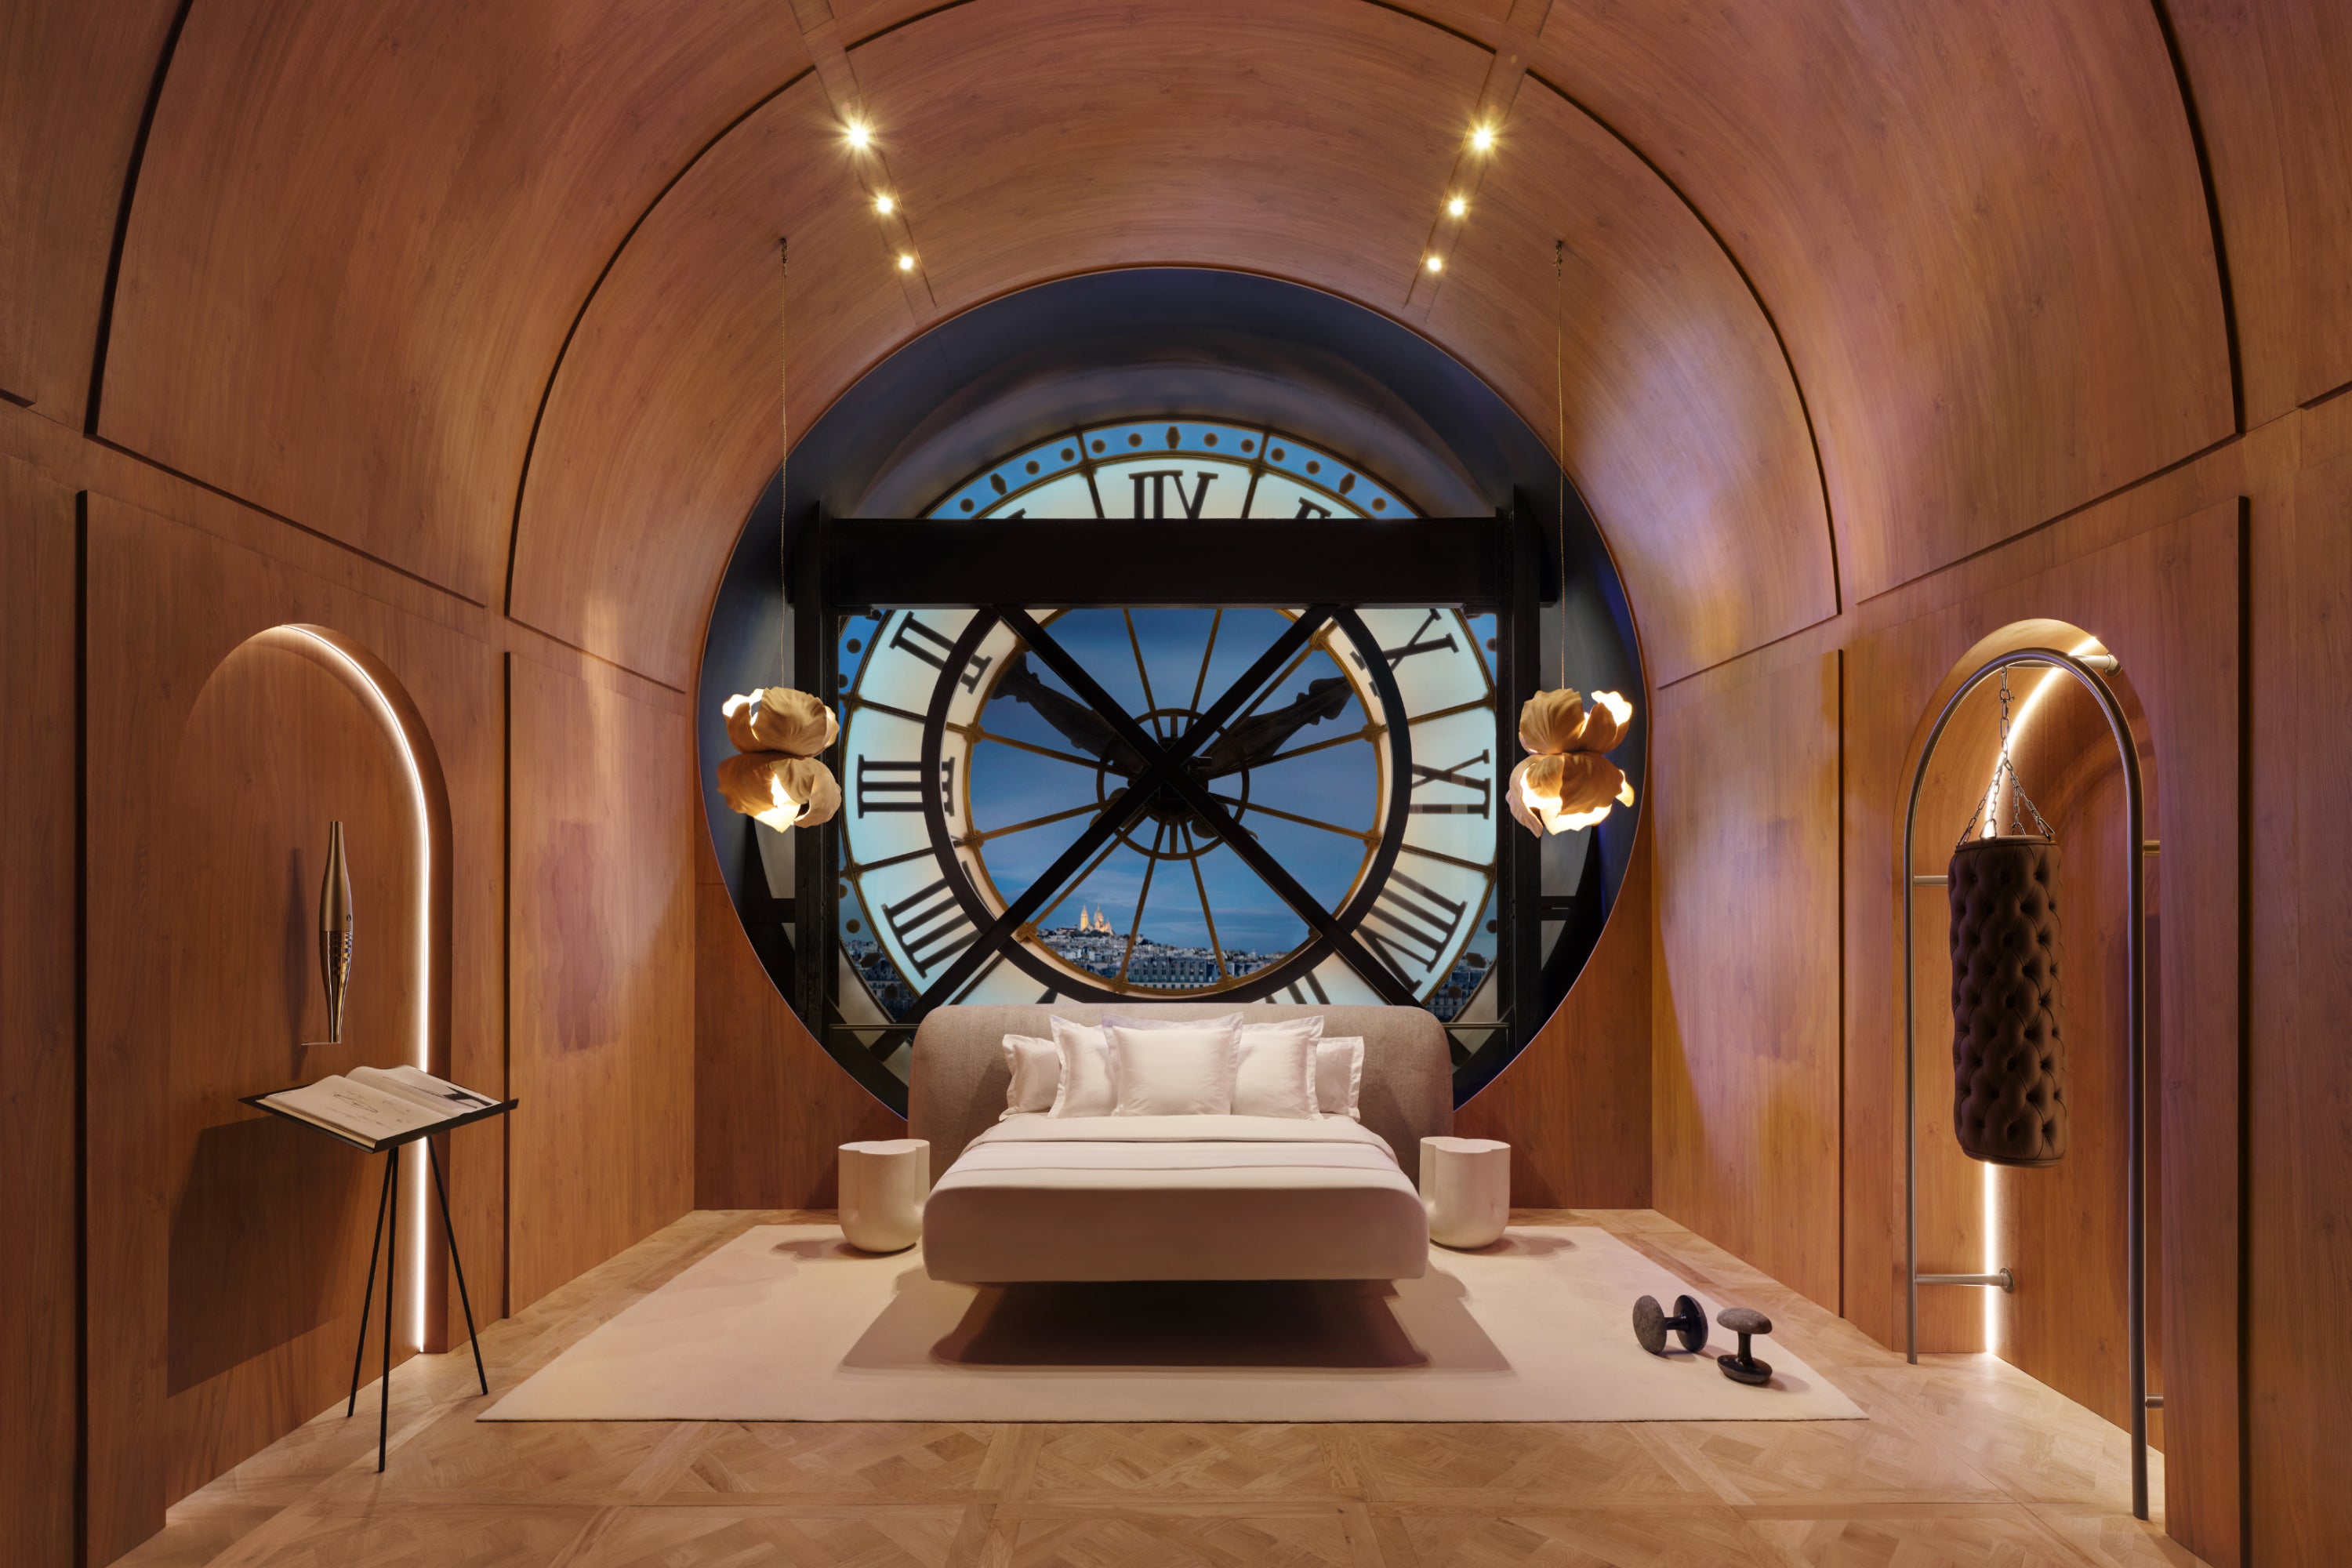 This could easily be the coolest spot to stay in Paris